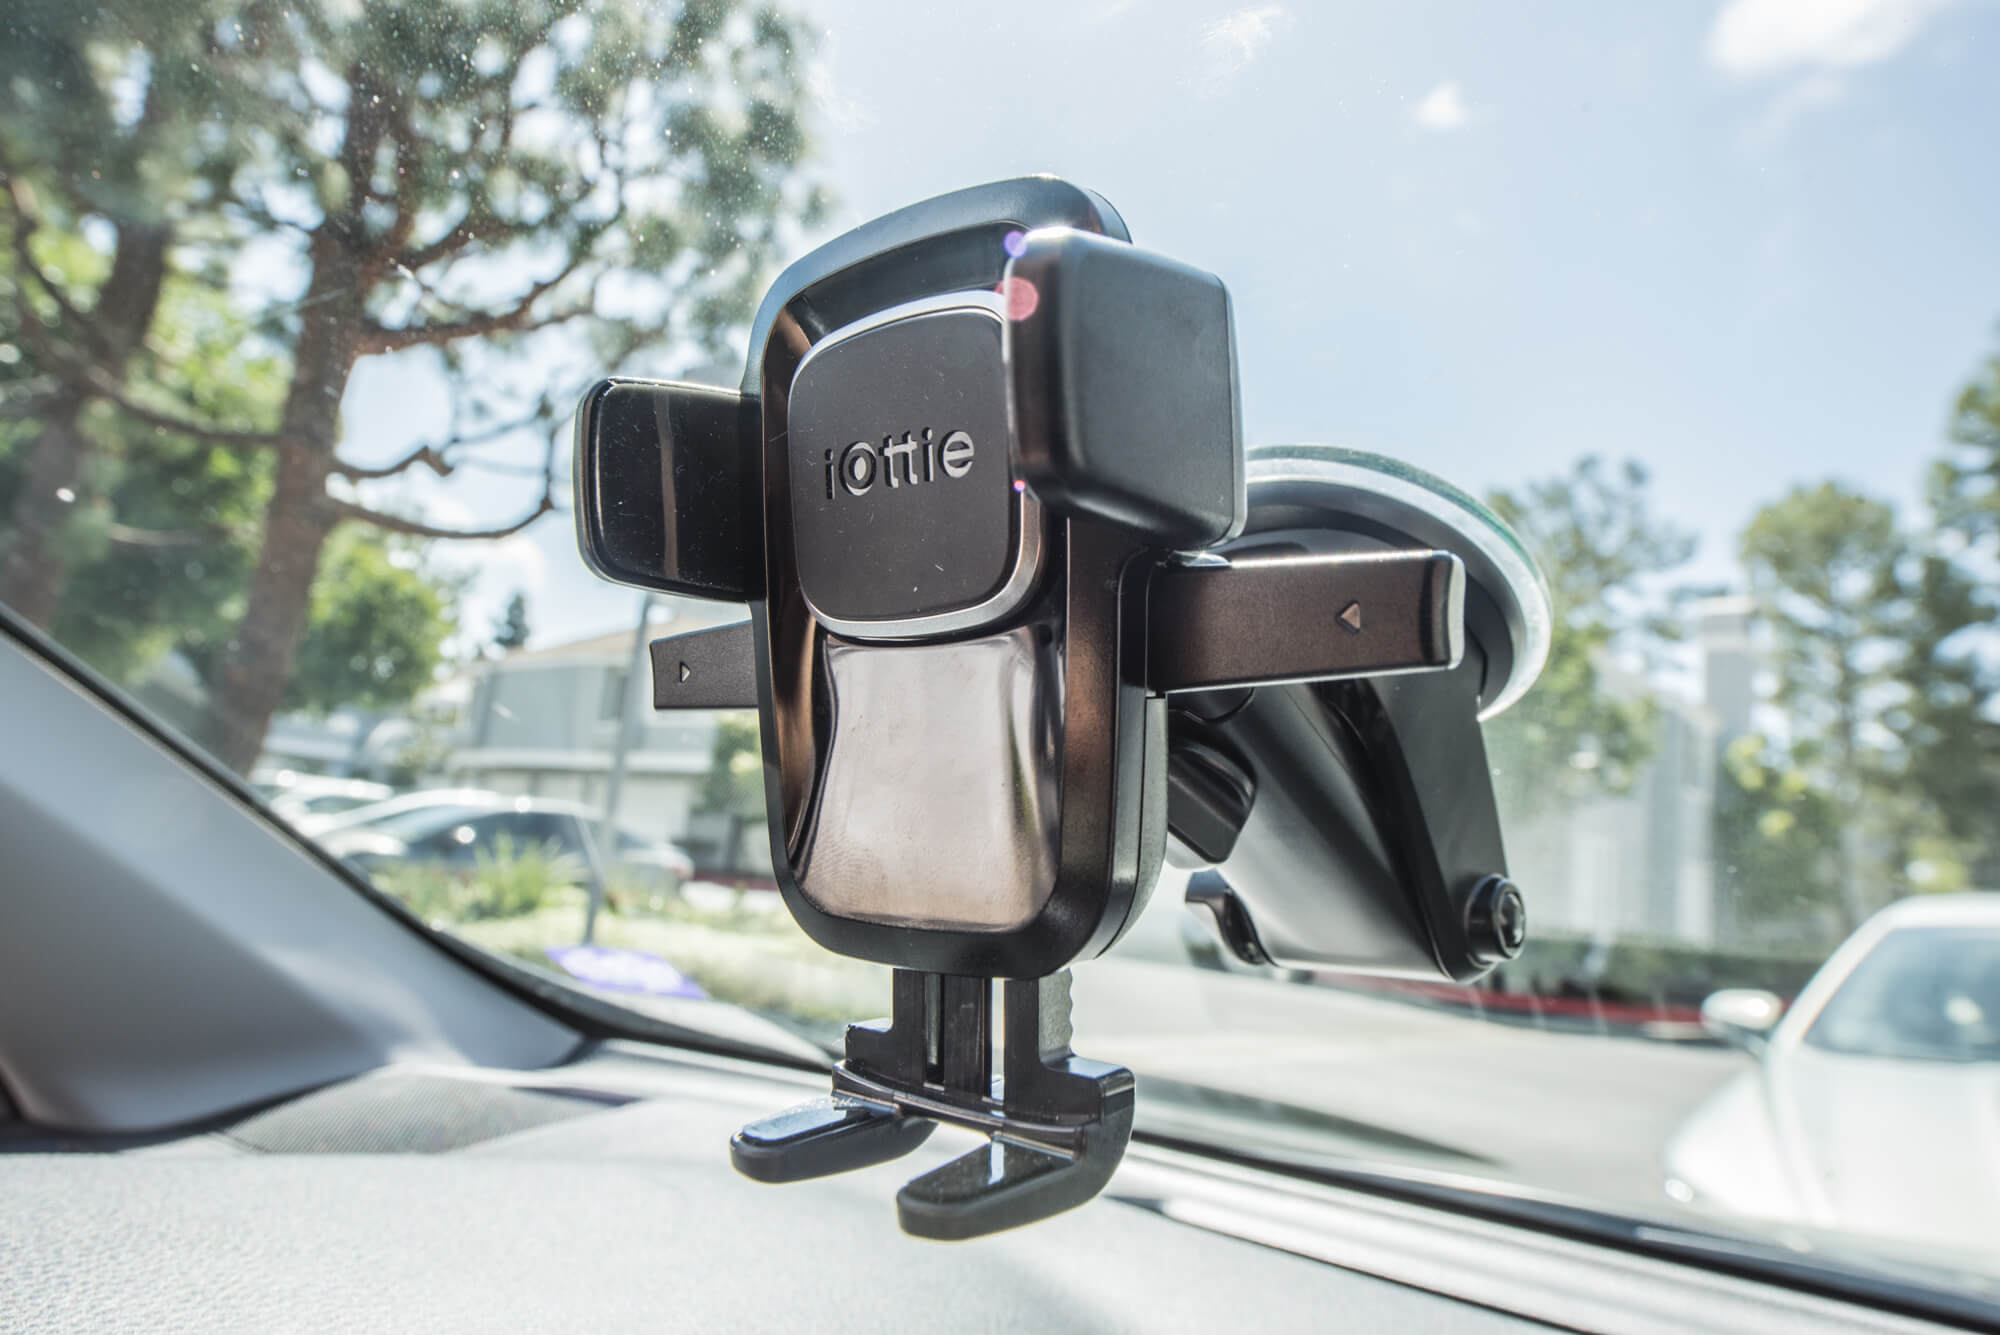 Top 4 Best Places to Mount a Car Phone Holder